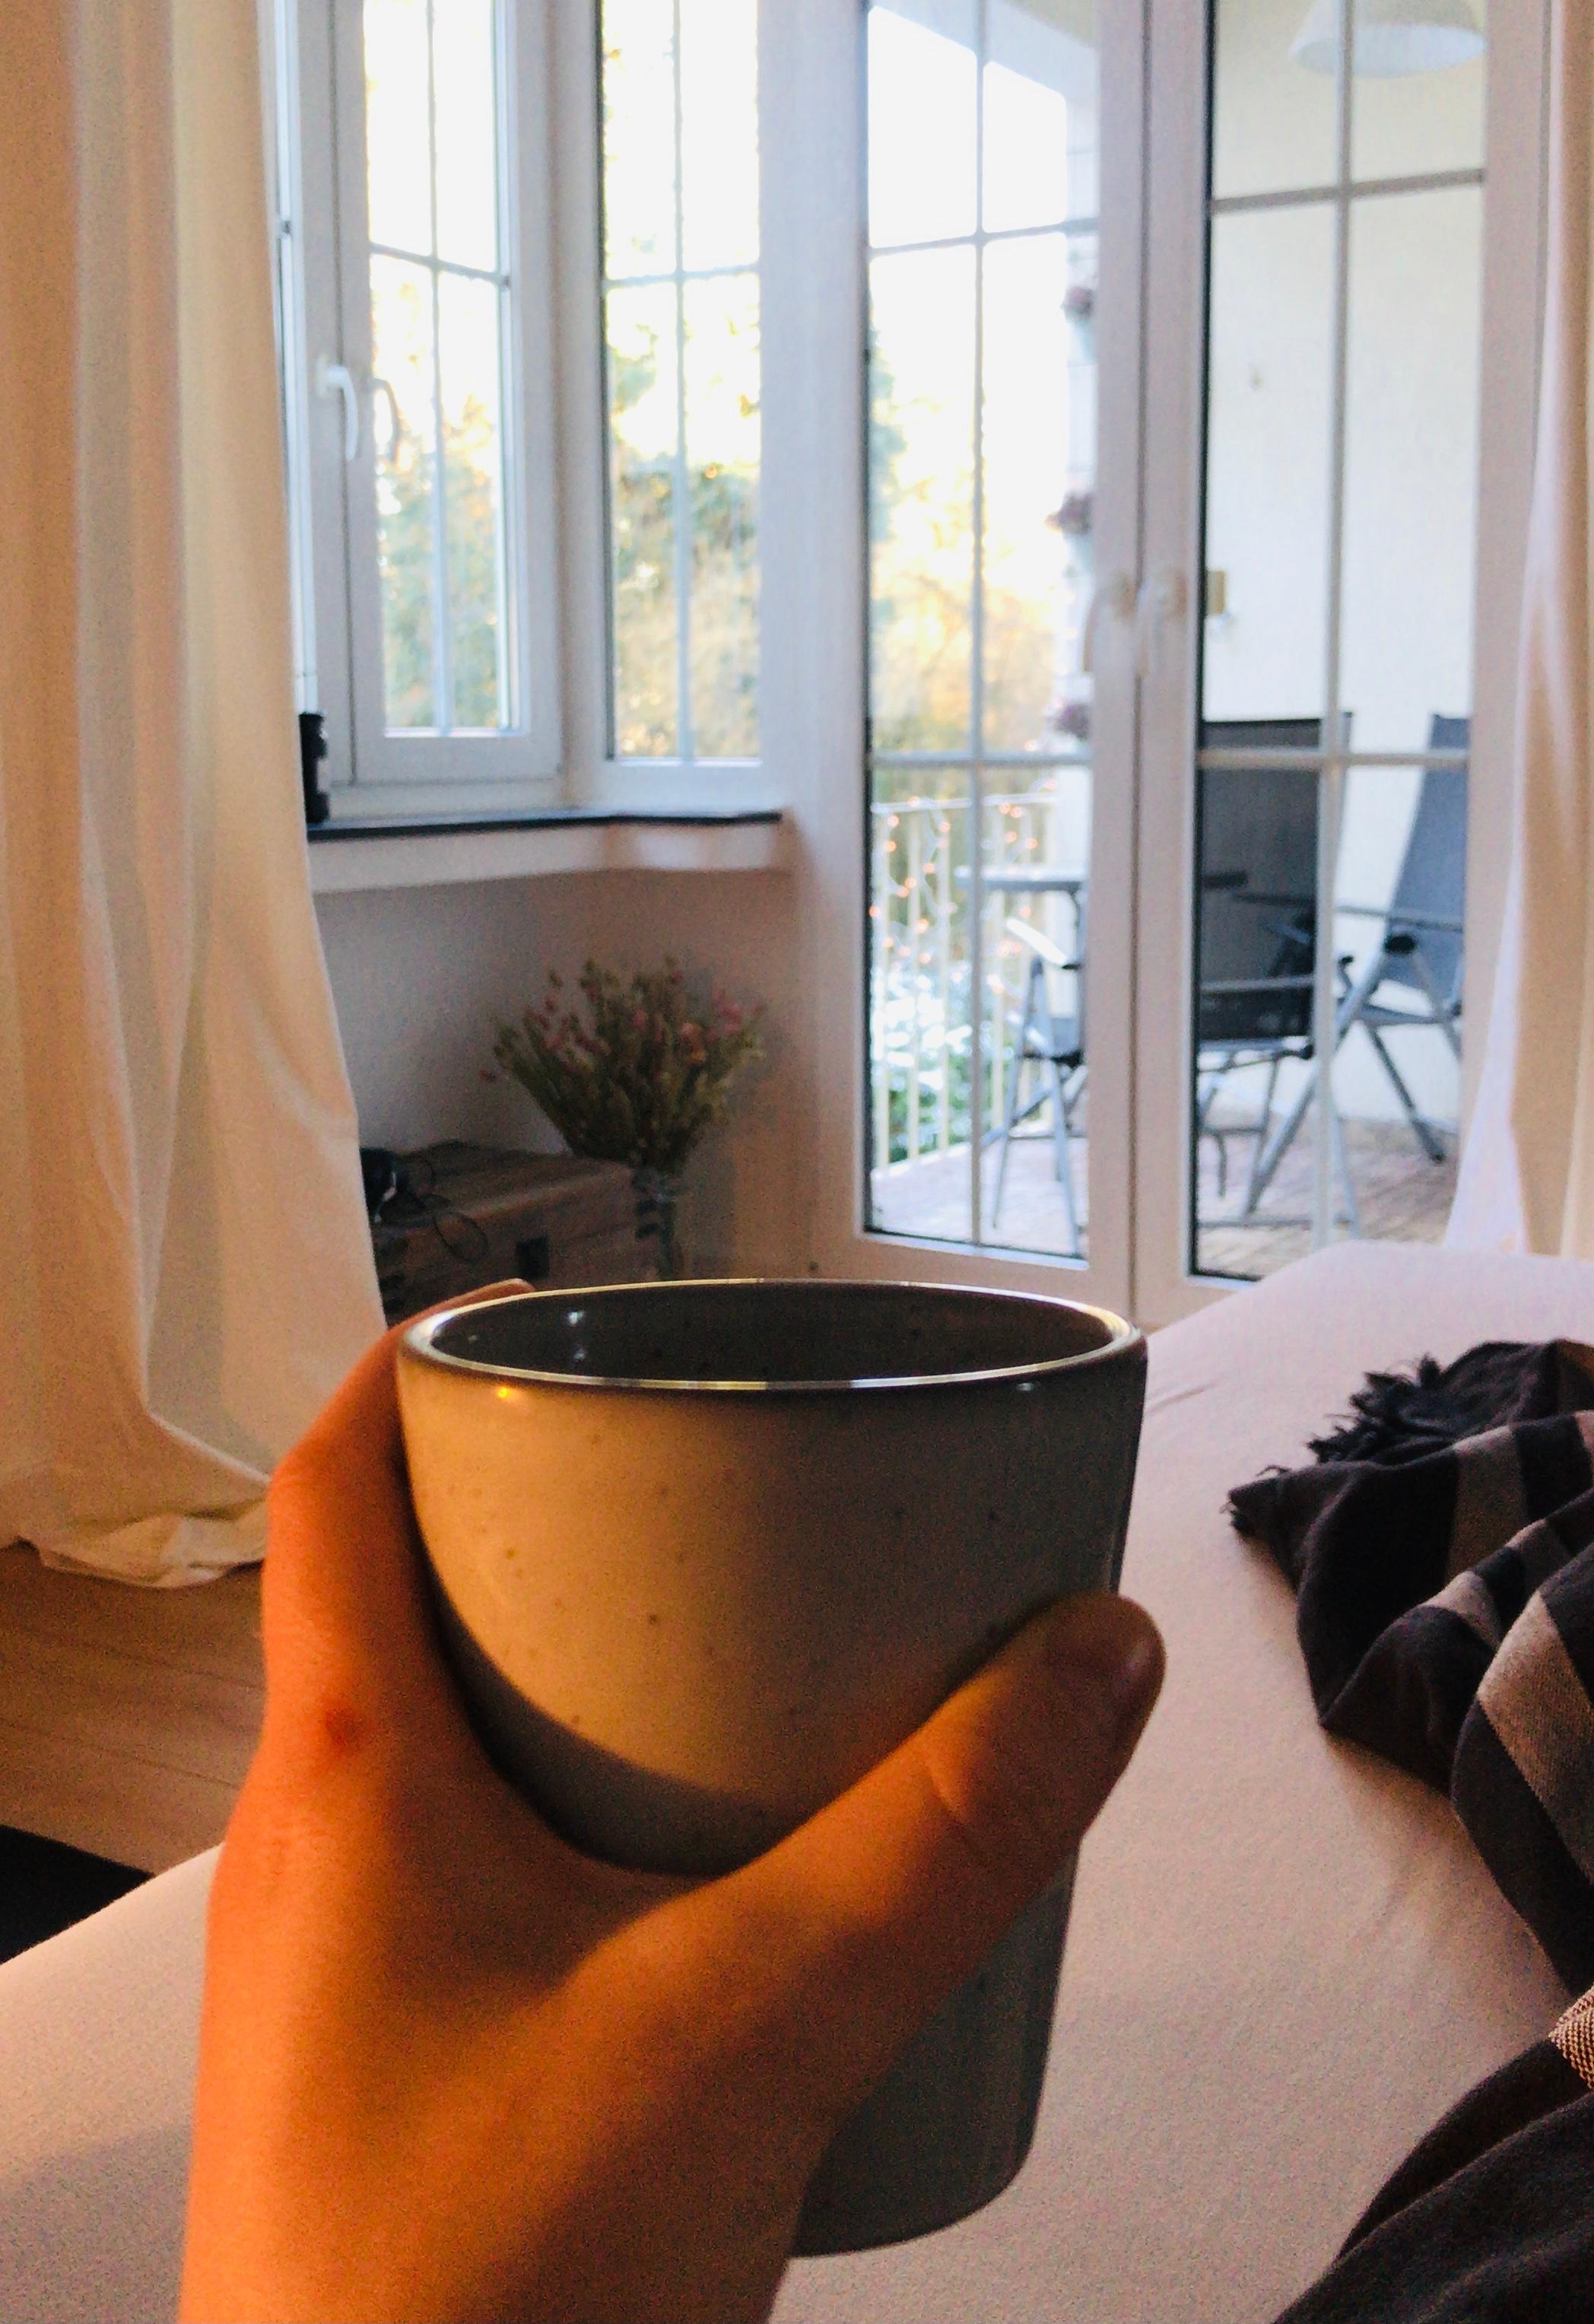 Starting the day right. 

#coffeinbed 

#coffeelover #foodchallenge 